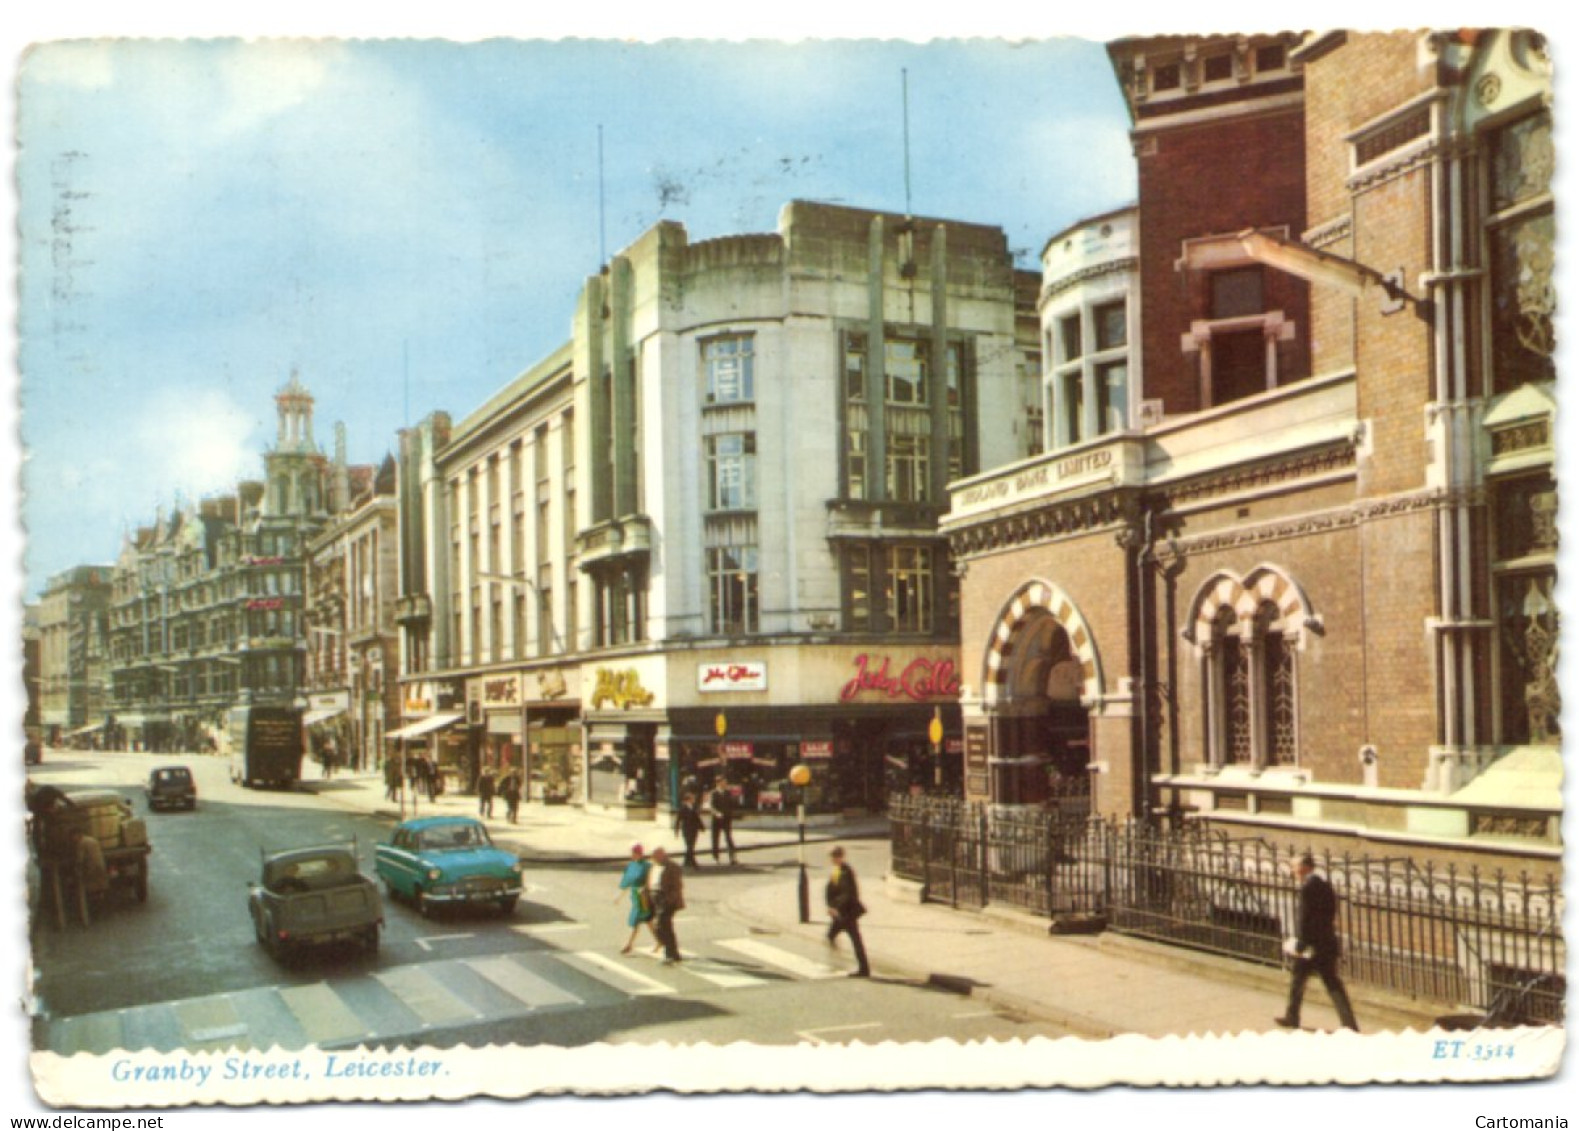 Leicester - Granby Street - Leicester